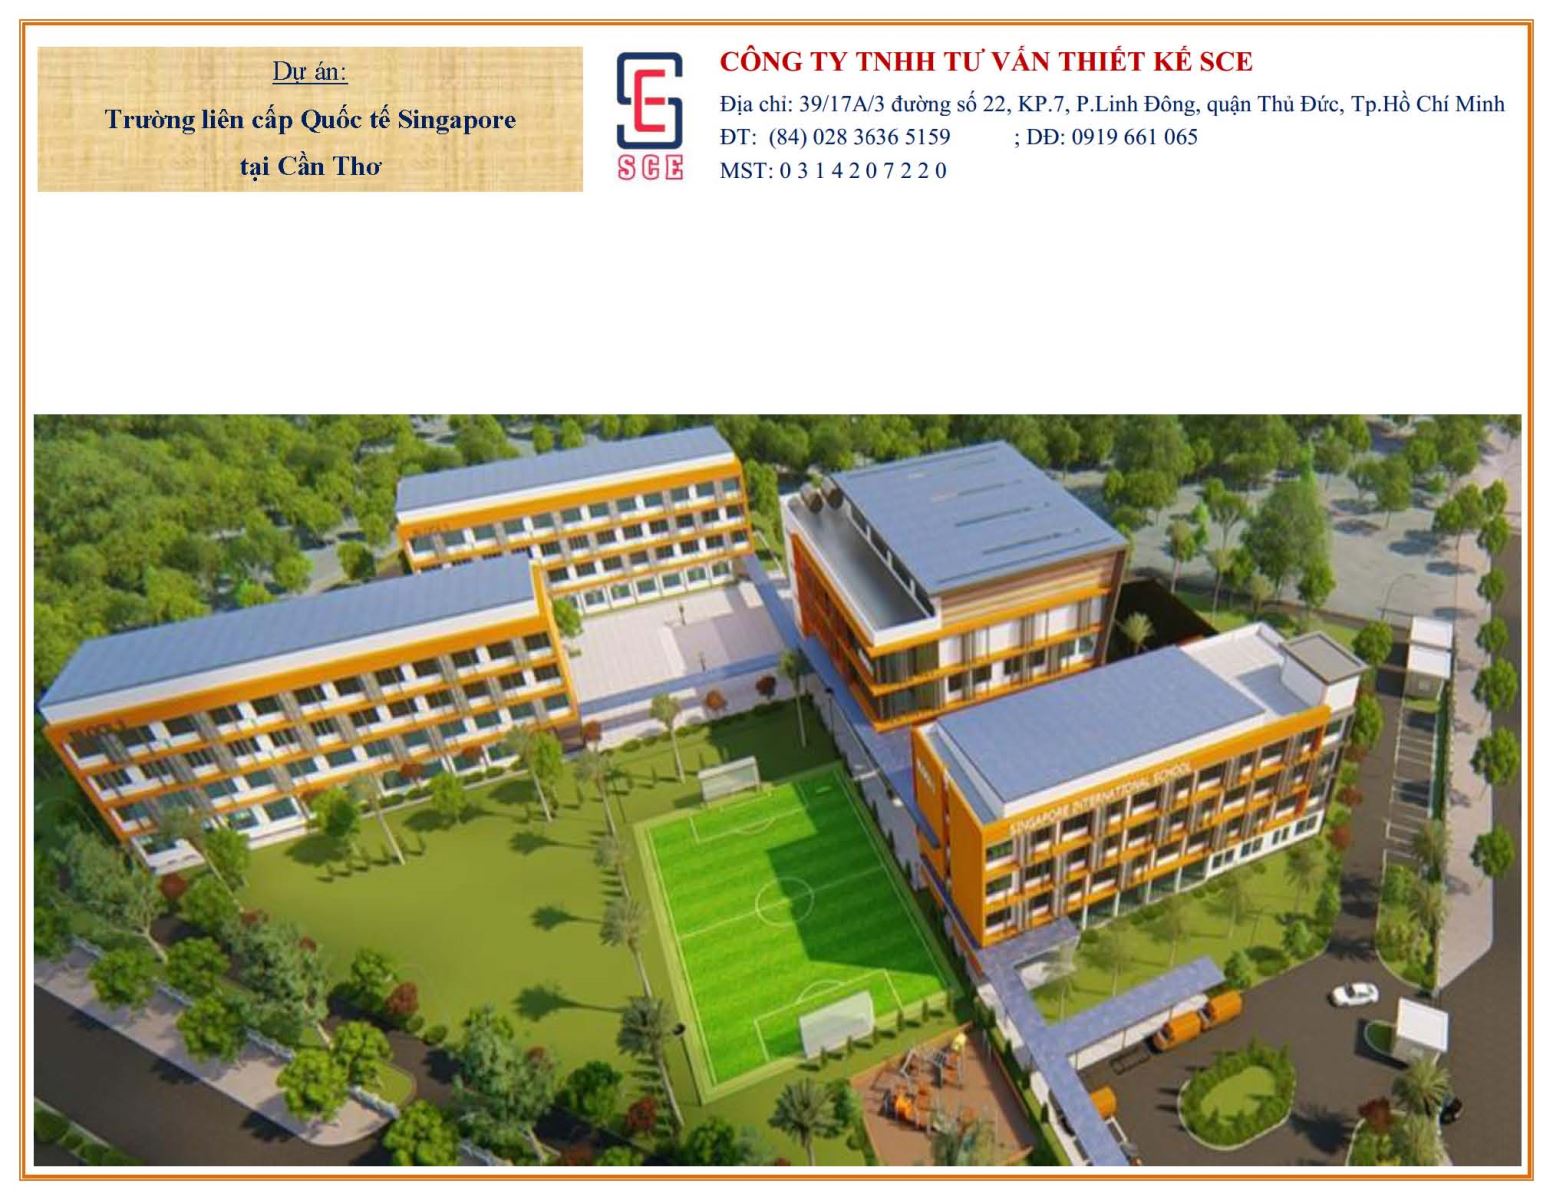 Singapore International School in Can Tho